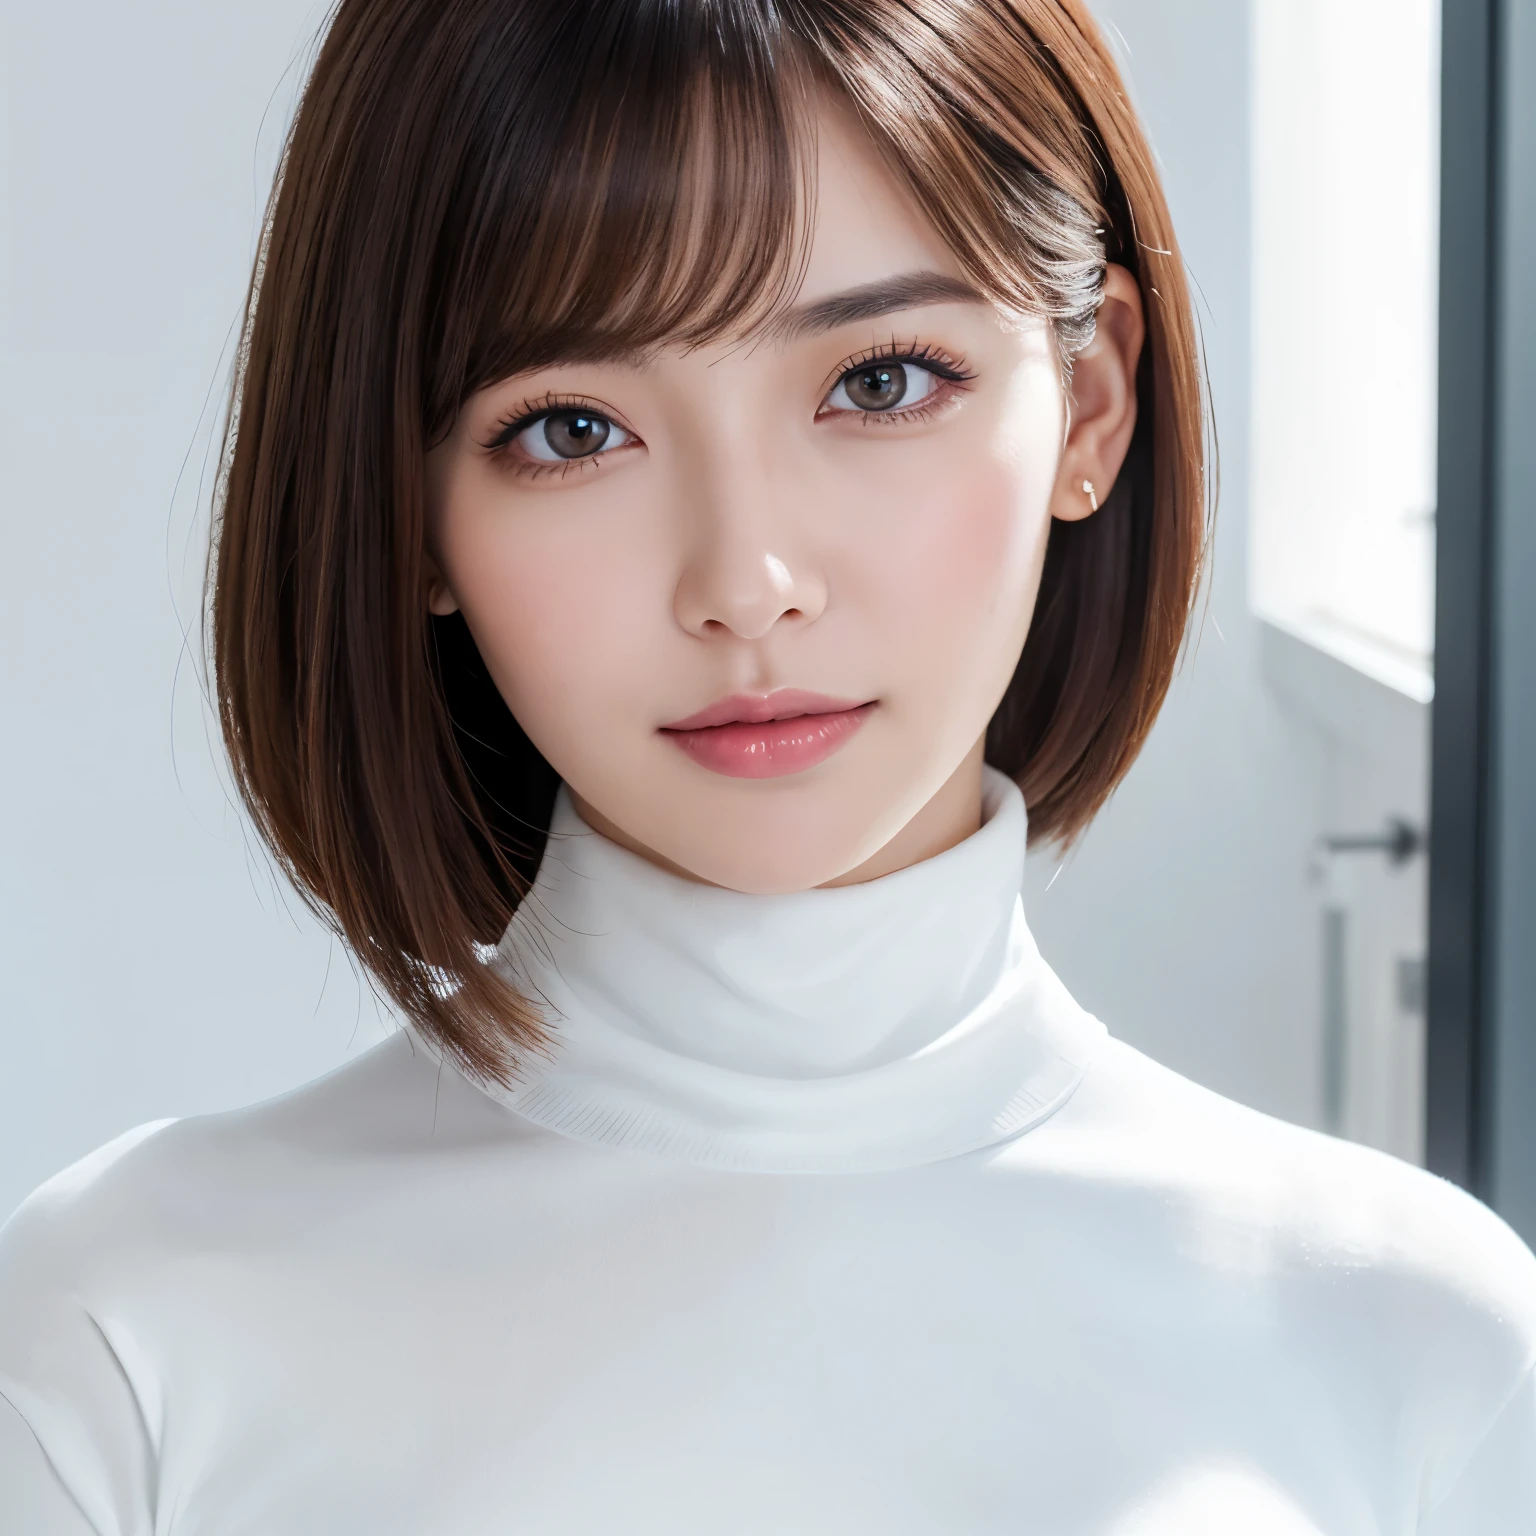 (highest quality、table top、8k、best image quality、Award-winning work)、One cute beauty、(straight short hair:1.1)、(alone:1.1)、(White tight see-through turtleneck knit:1.2)、(The simplest pure white background:1.2)、(Perfectly fixed on the front:1.1)、close up of face、(very big breasts:1.2)、(emphasize body line:1.2)、close up of face、(Perfect frontal and horizontal portrait of a woman with proper white space:1.2)、(Perfect depiction of a woman horizontally and from the front:1.2)、beautiful and detailed eyes、look at me and smile、(Upright photo from the chest up:1.2)、(turn around and look straight at me:1.2)、perfect makeup、Ultra high definition beauty face、ultra high definition hair、Super high-definition sparkling eyes、Ultra high definition perfect teeth、Super high resolution glossy lips、accurate anatomy、very beautiful skin、(Pure white skin that shines with ultra-high resolution:1.1)、Elegant upright posture when viewed from the front、(very bright:1.2)